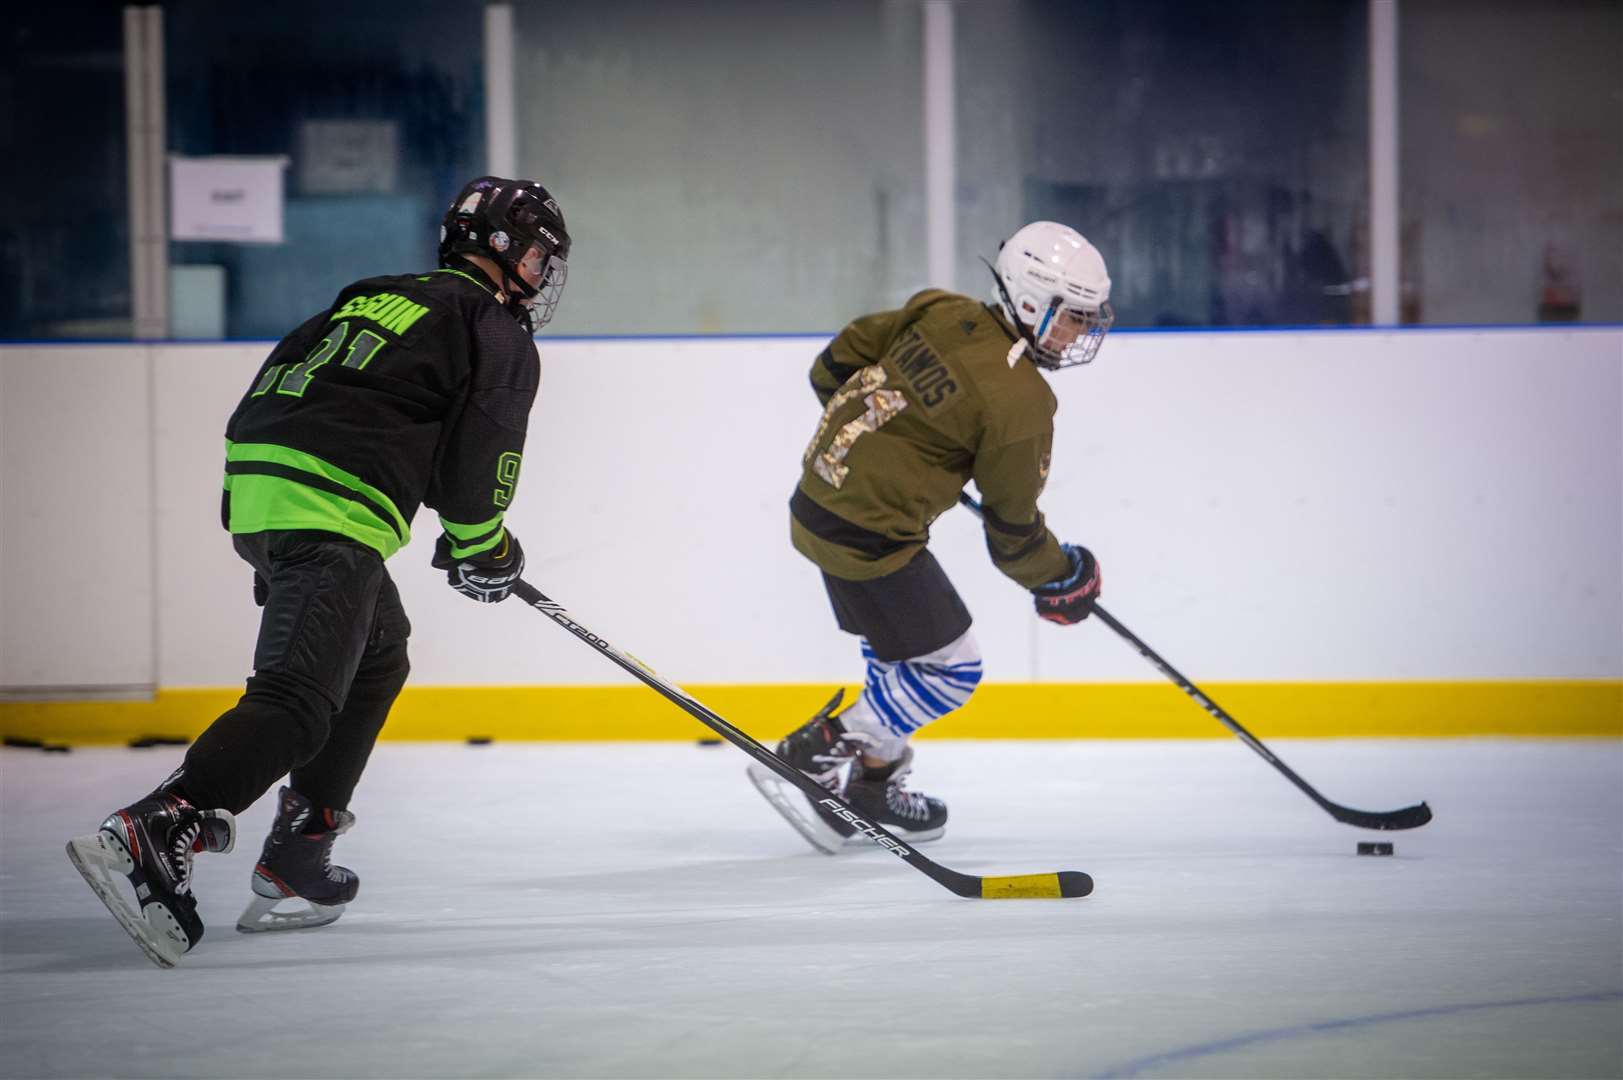 More youngsters are being given the opportunity to play competitive ice hockey as a result of the under-12 merger. Picture: Callum Mackay